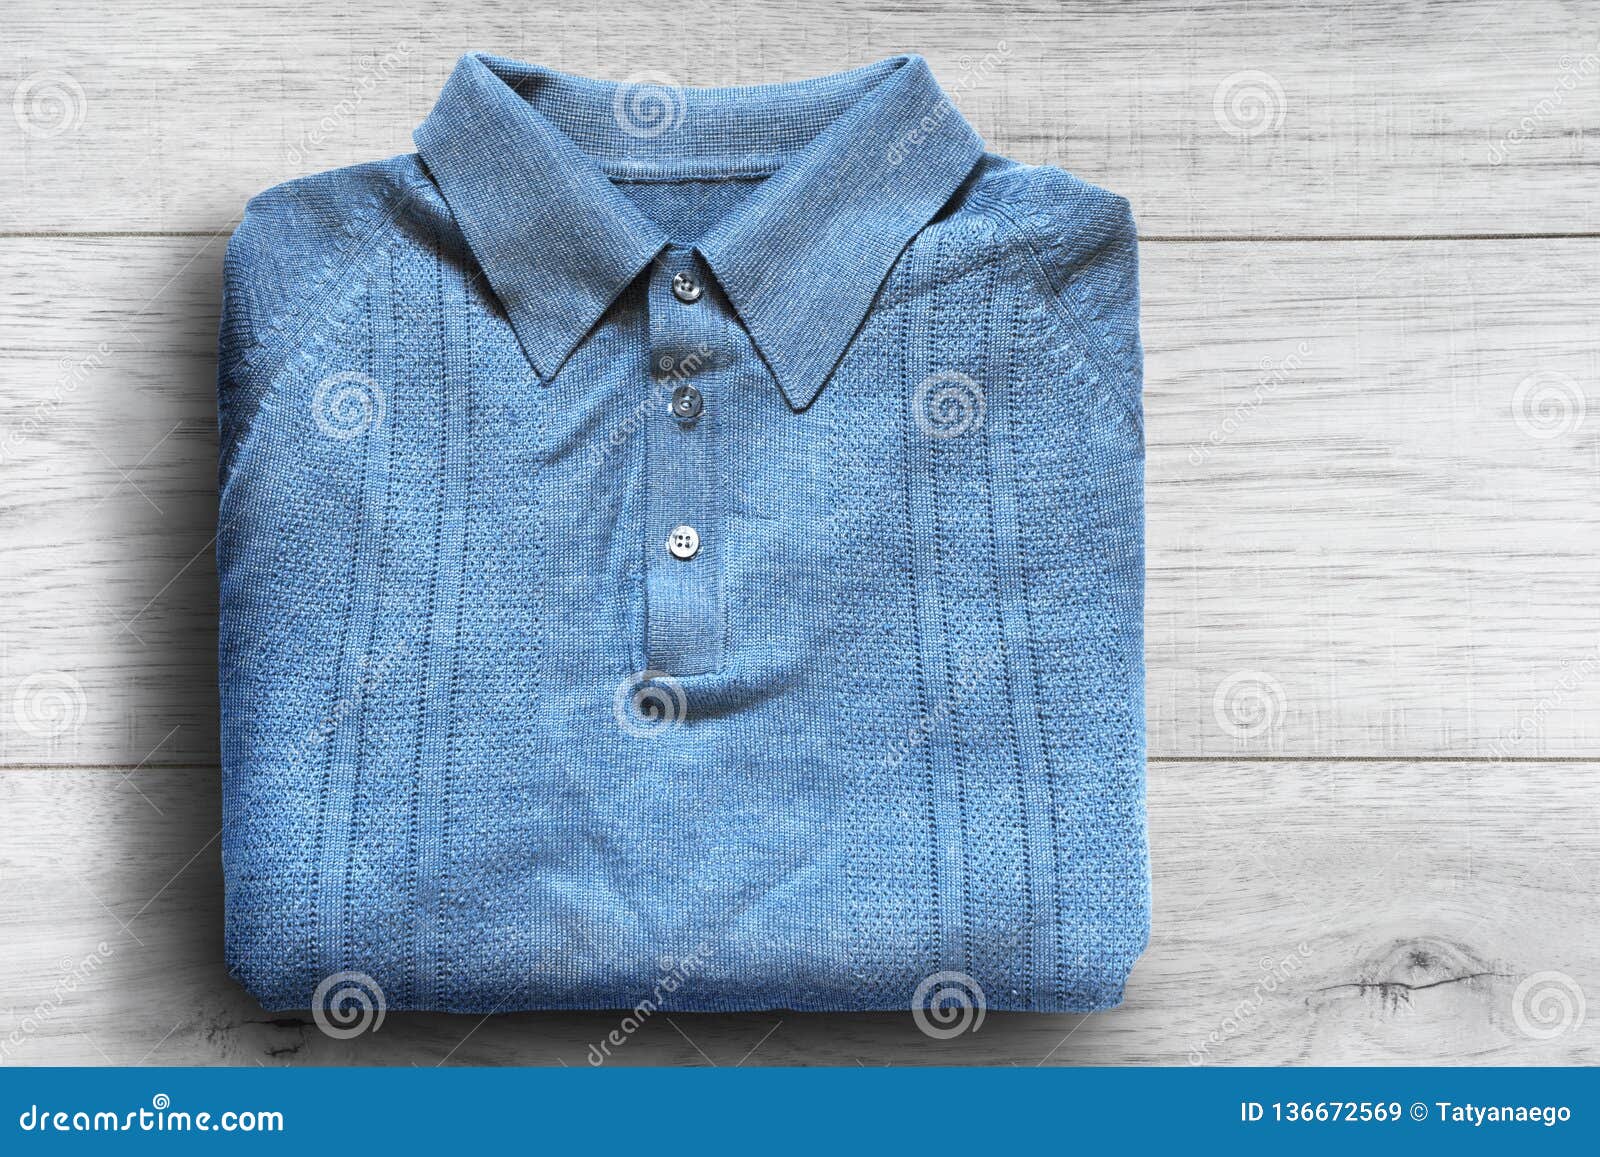 Shirt on wooden background stock image. Image of cotton - 136672569